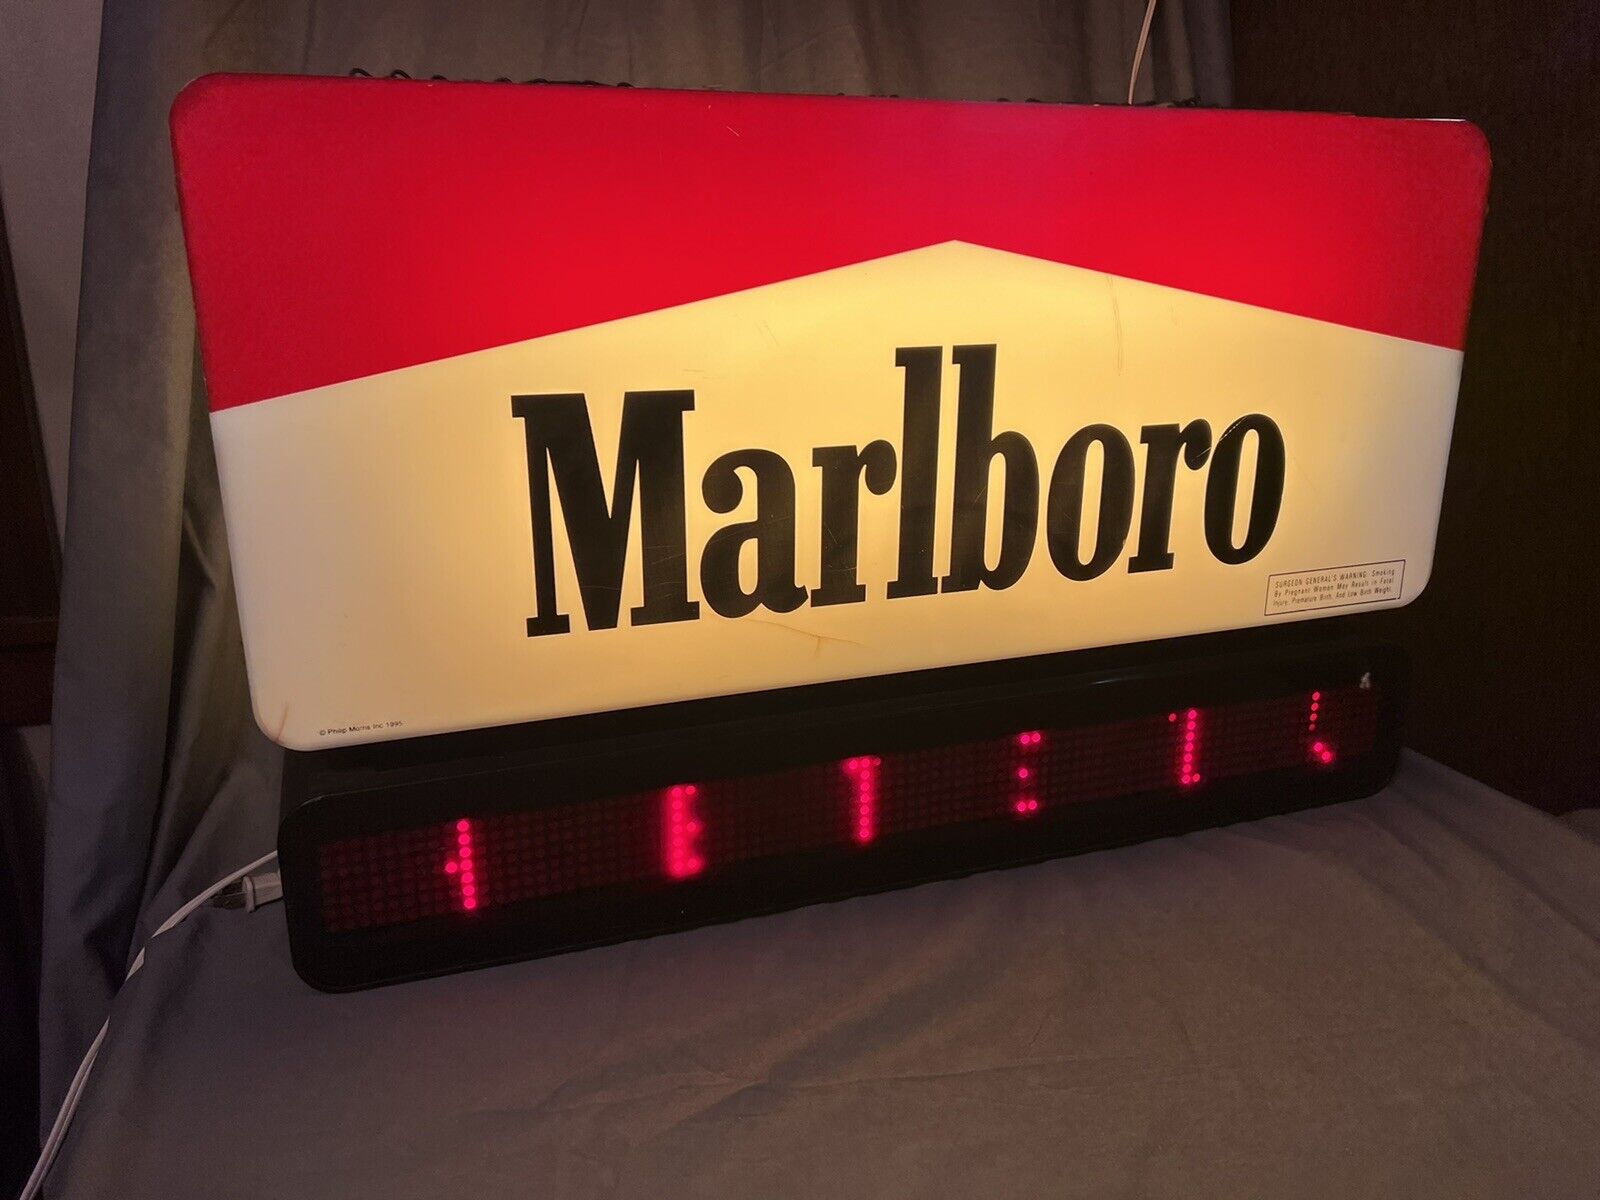 1995 Double Sided Lighted Marlboro sign / programable led message board - works